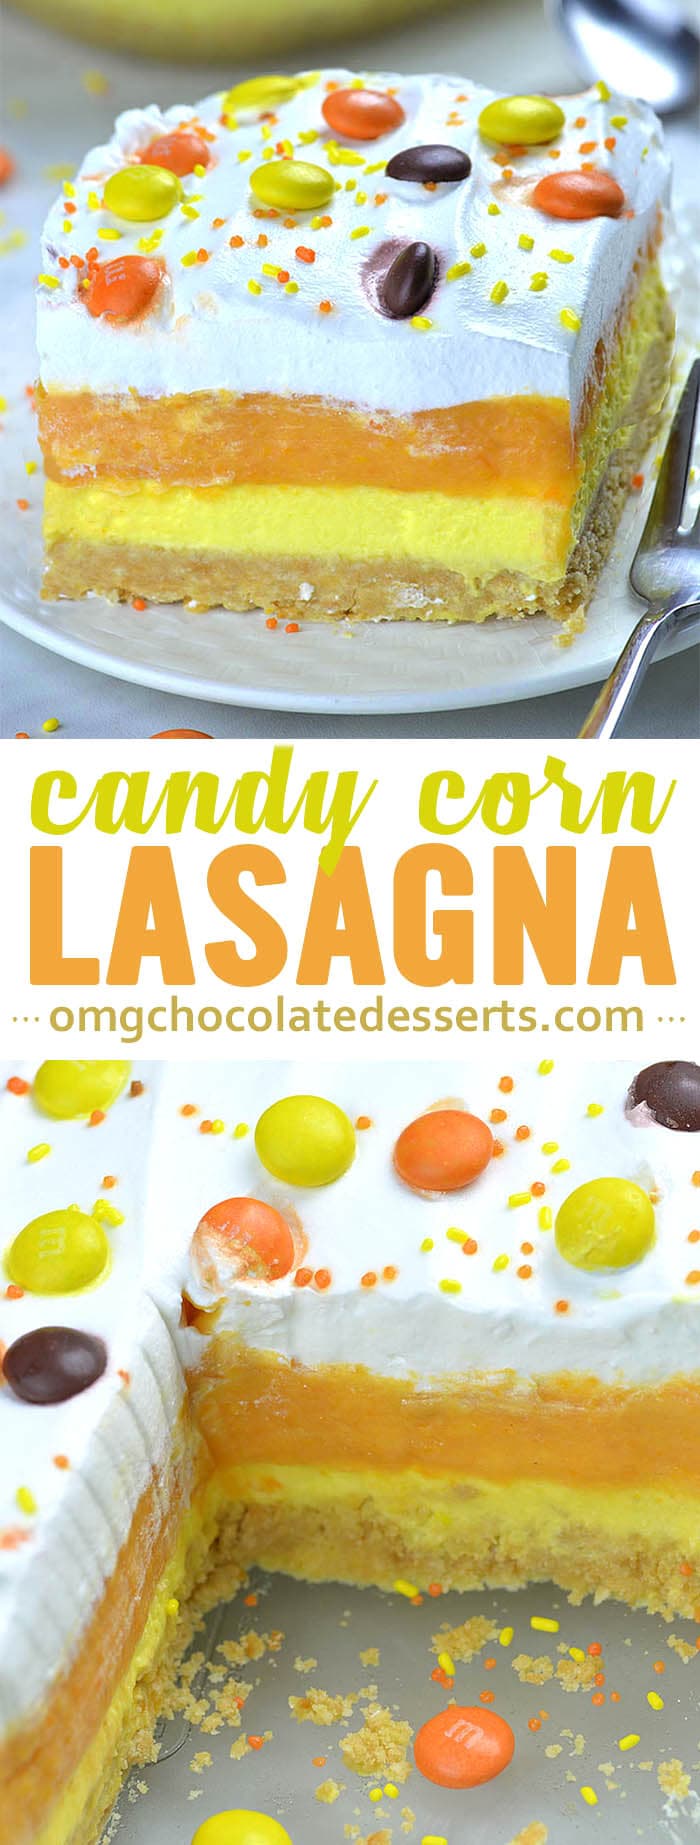 Candy Corn Lasagna is easy, no bake, fall dessert recipe with Golden Oreo crust, cheesecake filling, pumpkin layer and whipped cream on top.